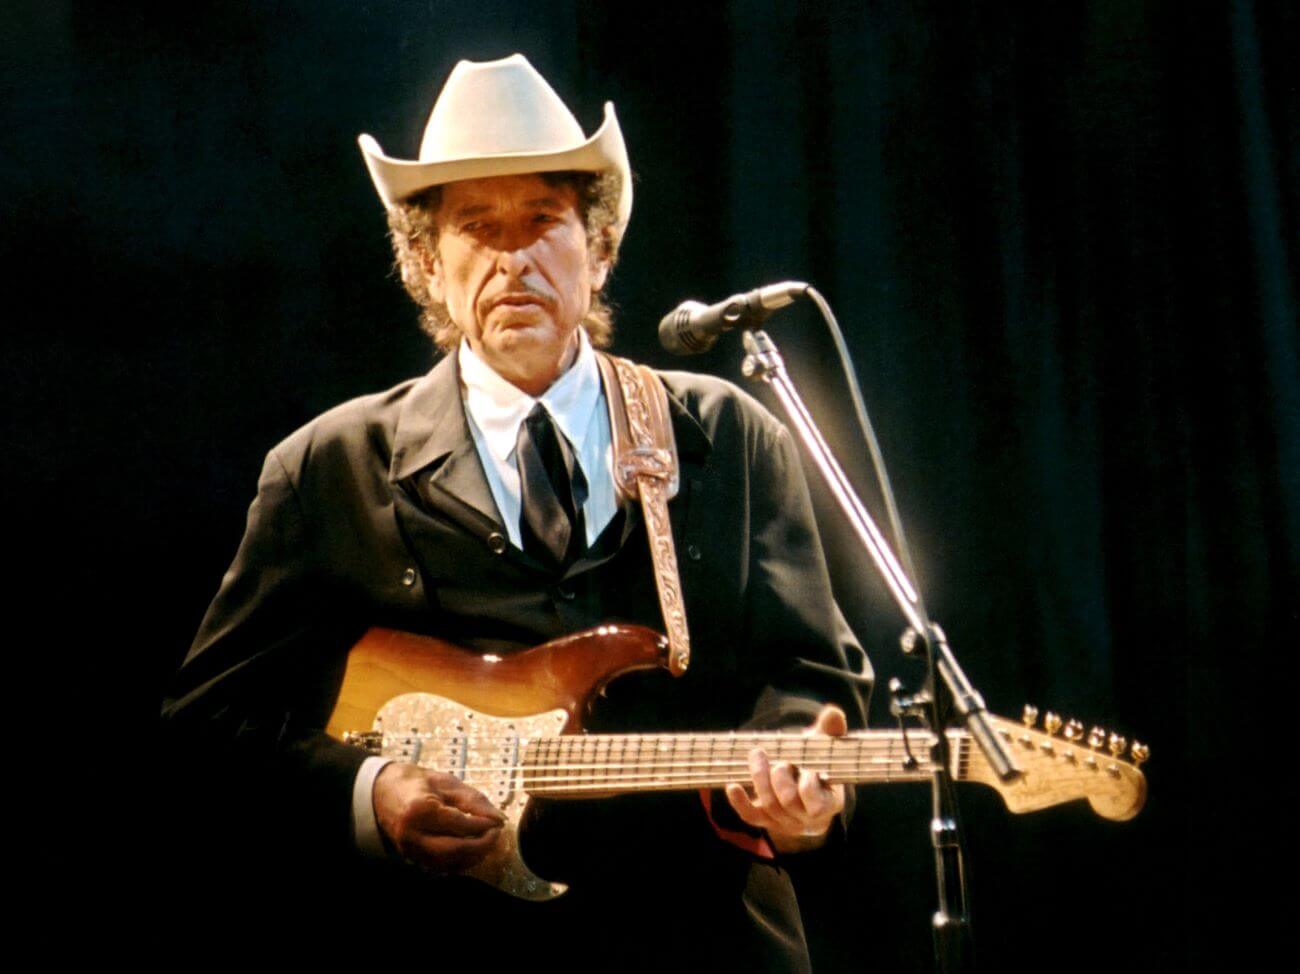 Bob Dylan wears a cowboy hat and holds a guitar while standing in front of a microphone.